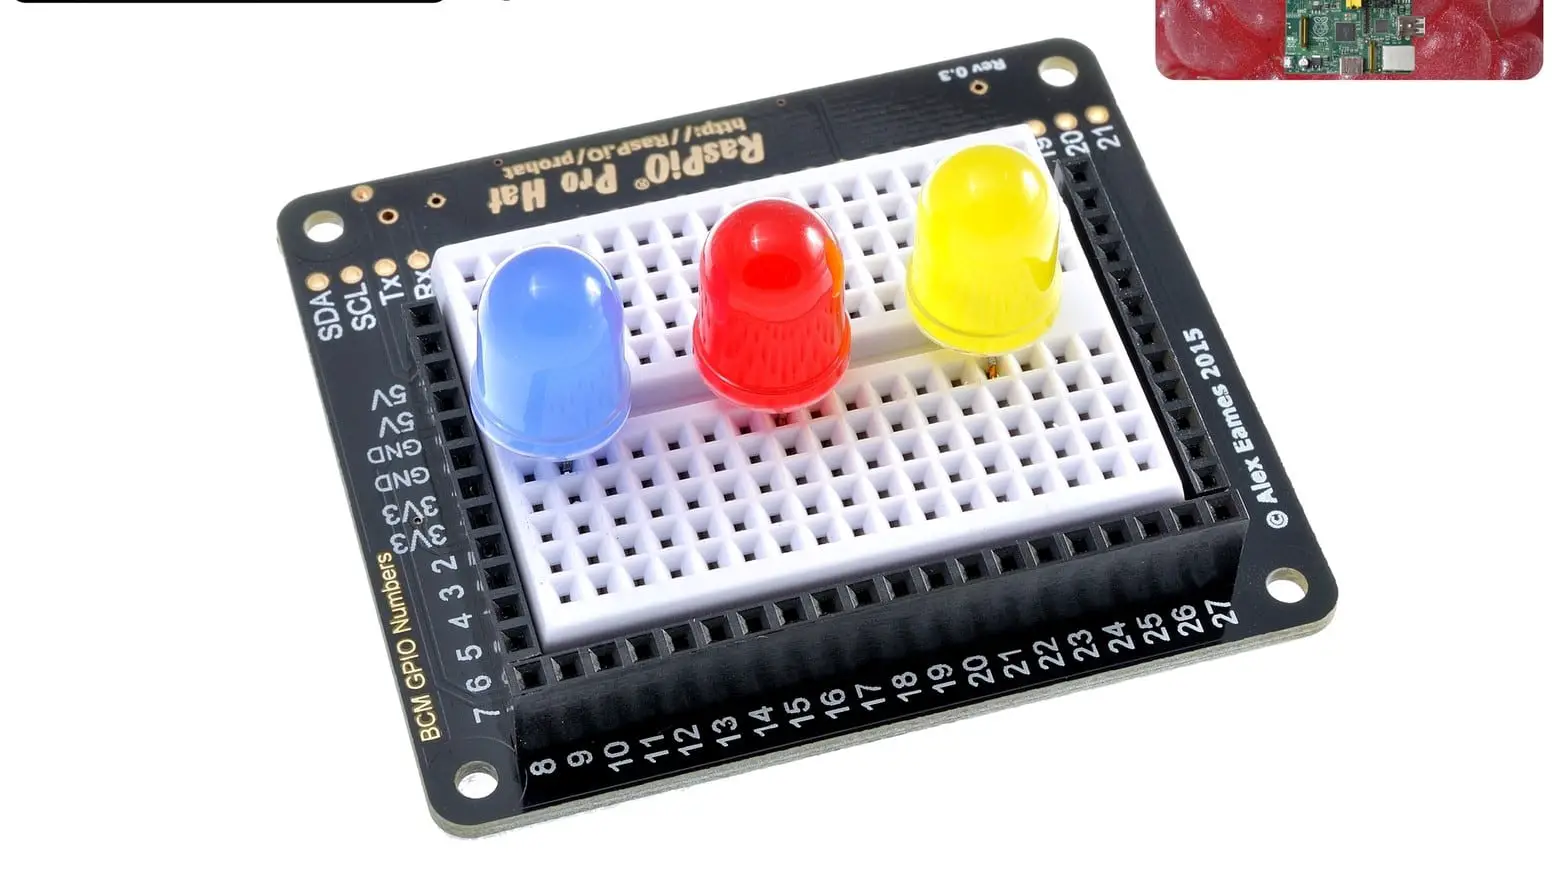 Top Raspberry Pi Hats and Add-on boards for Raspberry Pi